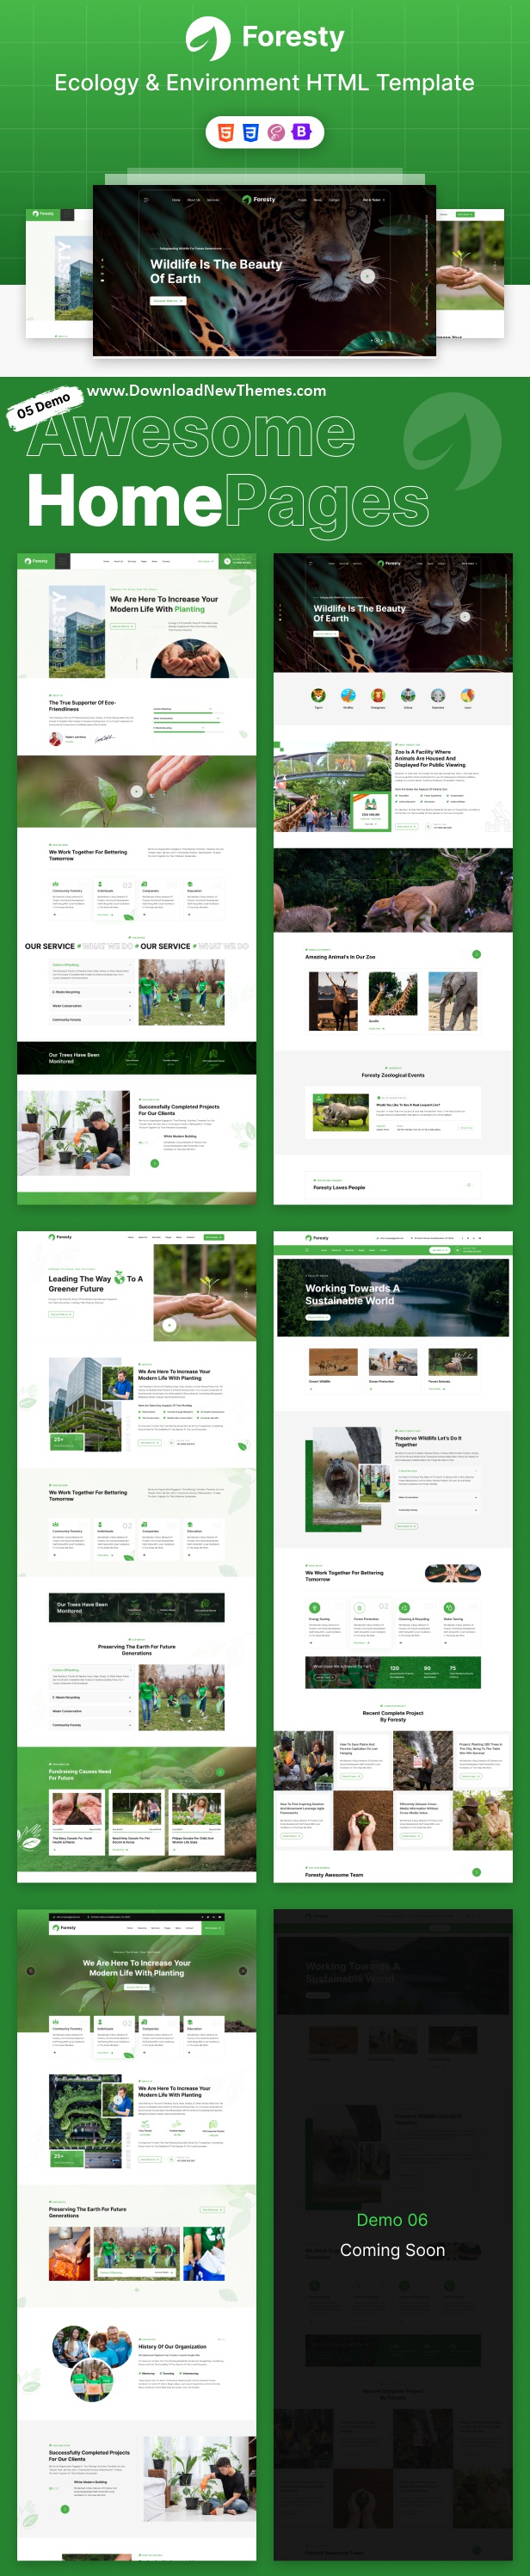 Foresty - Ecology & Environment HTML Template Review